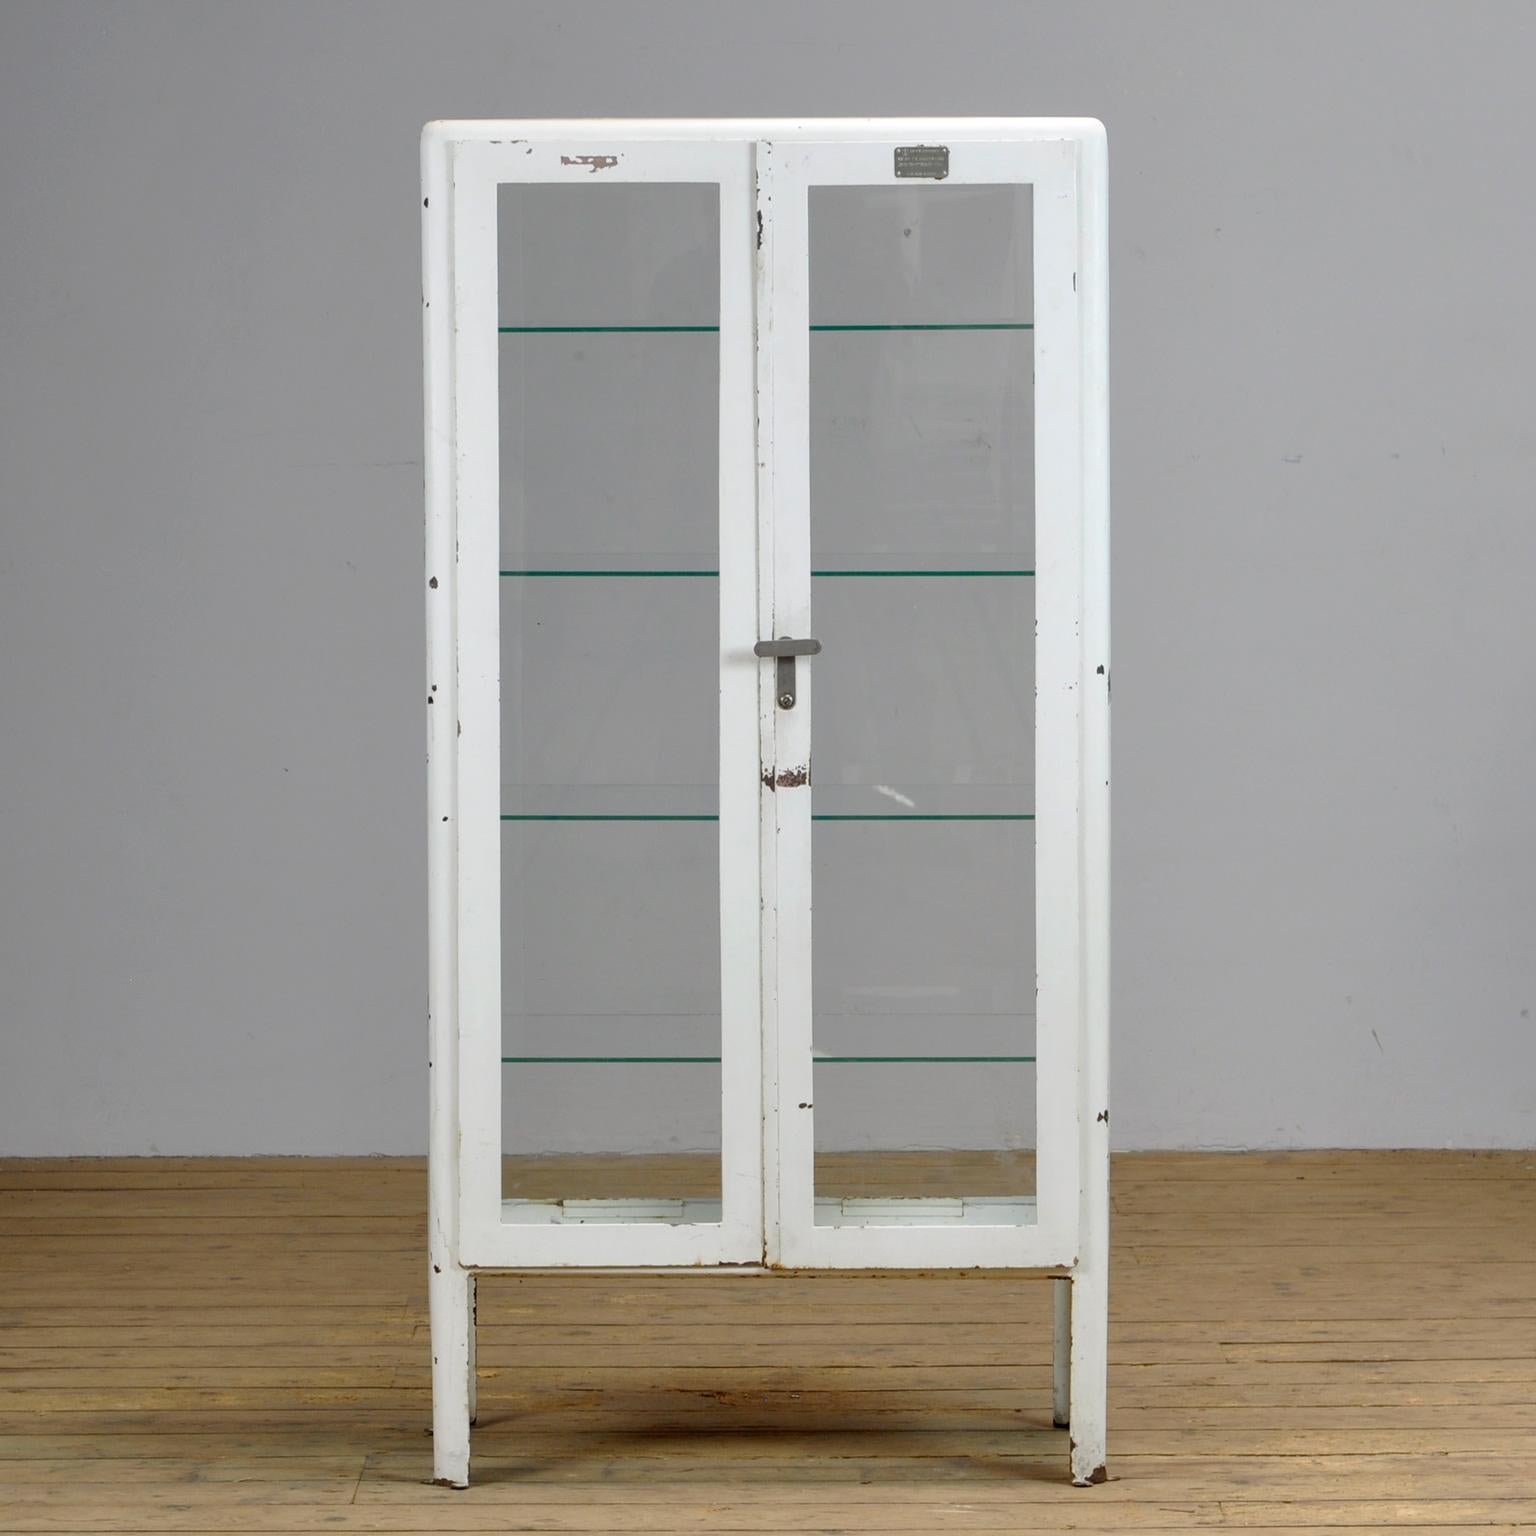 Iron medicine cabinet from the Ukraine with glass on four sides. Produced in the 1960's. Space between the shelves is 28 cm.